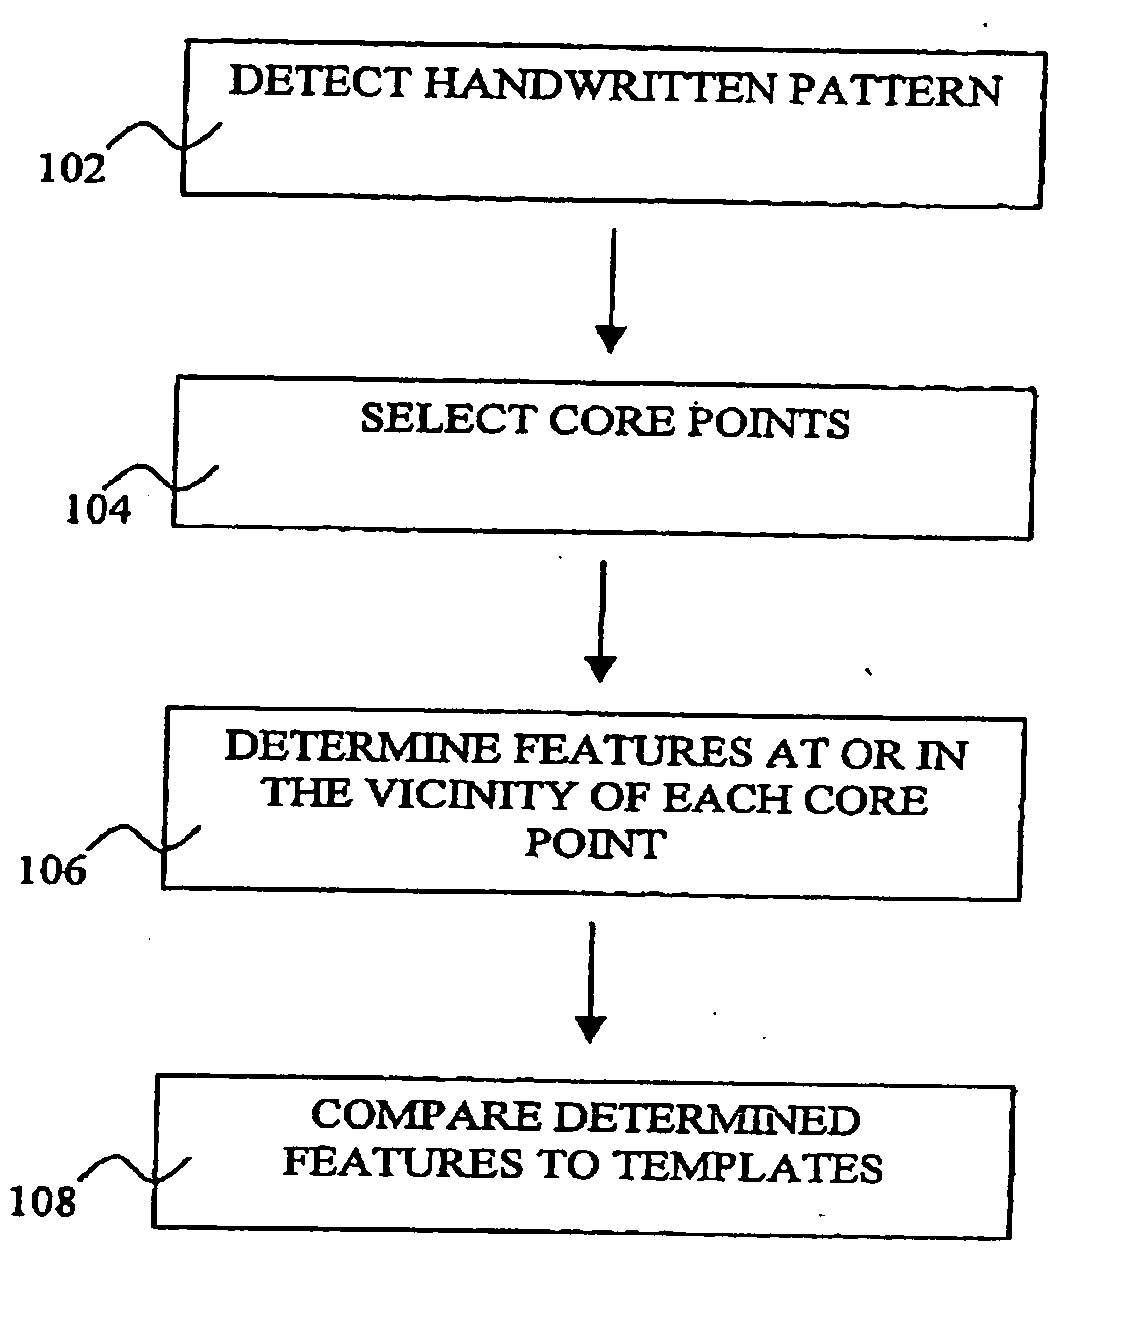 Handling of diacritic points